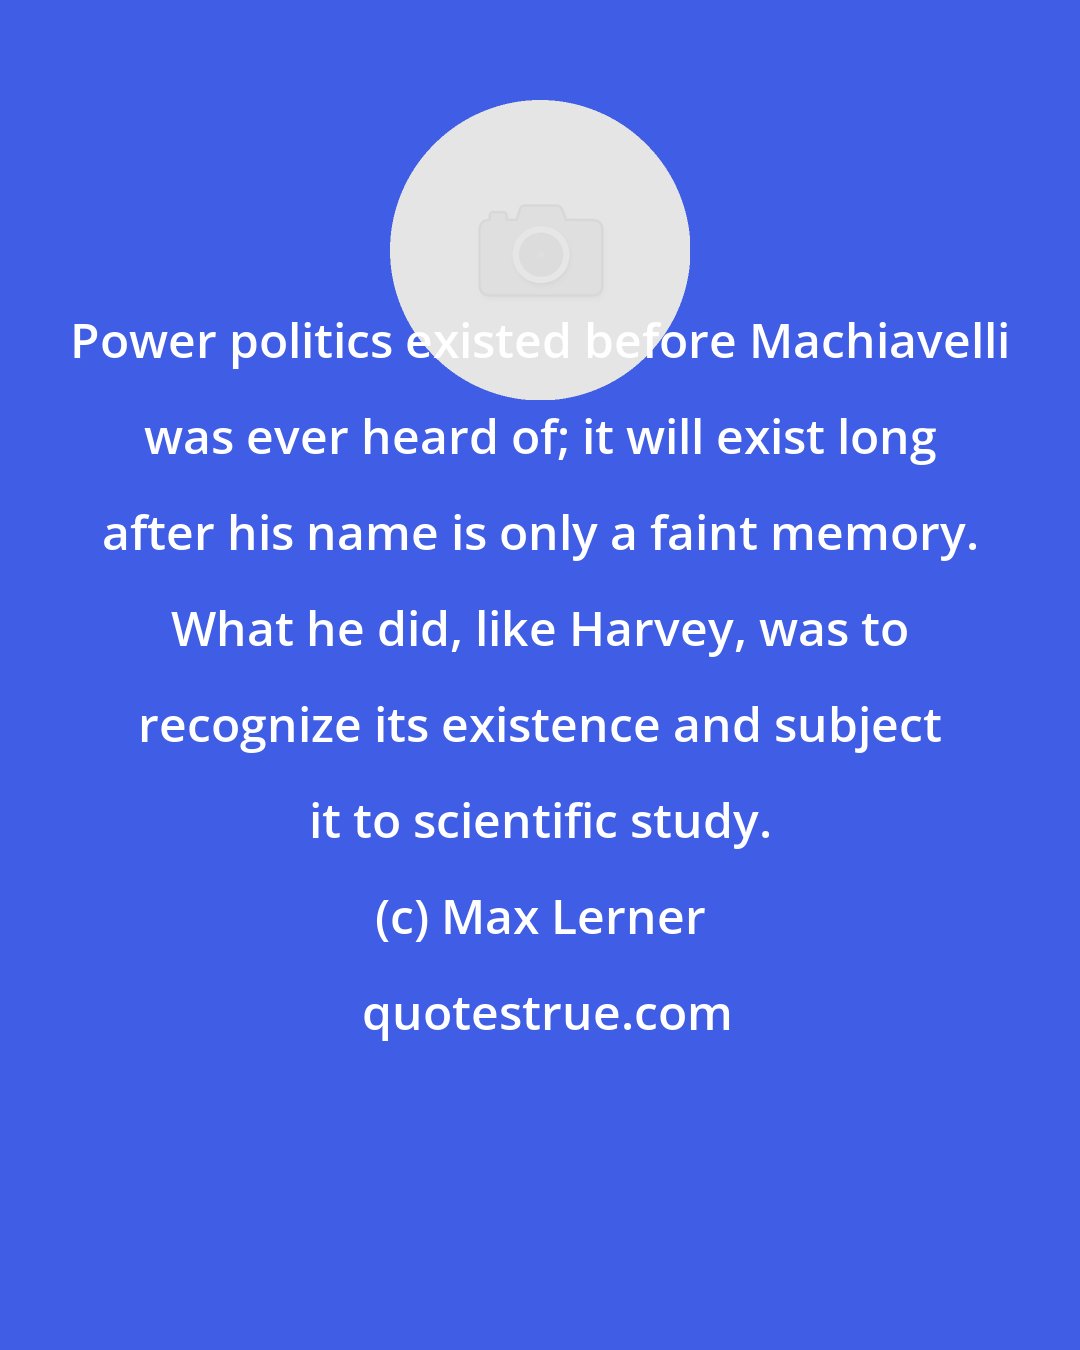 Max Lerner: Power politics existed before Machiavelli was ever heard of; it will exist long after his name is only a faint memory. What he did, like Harvey, was to recognize its existence and subject it to scientific study.